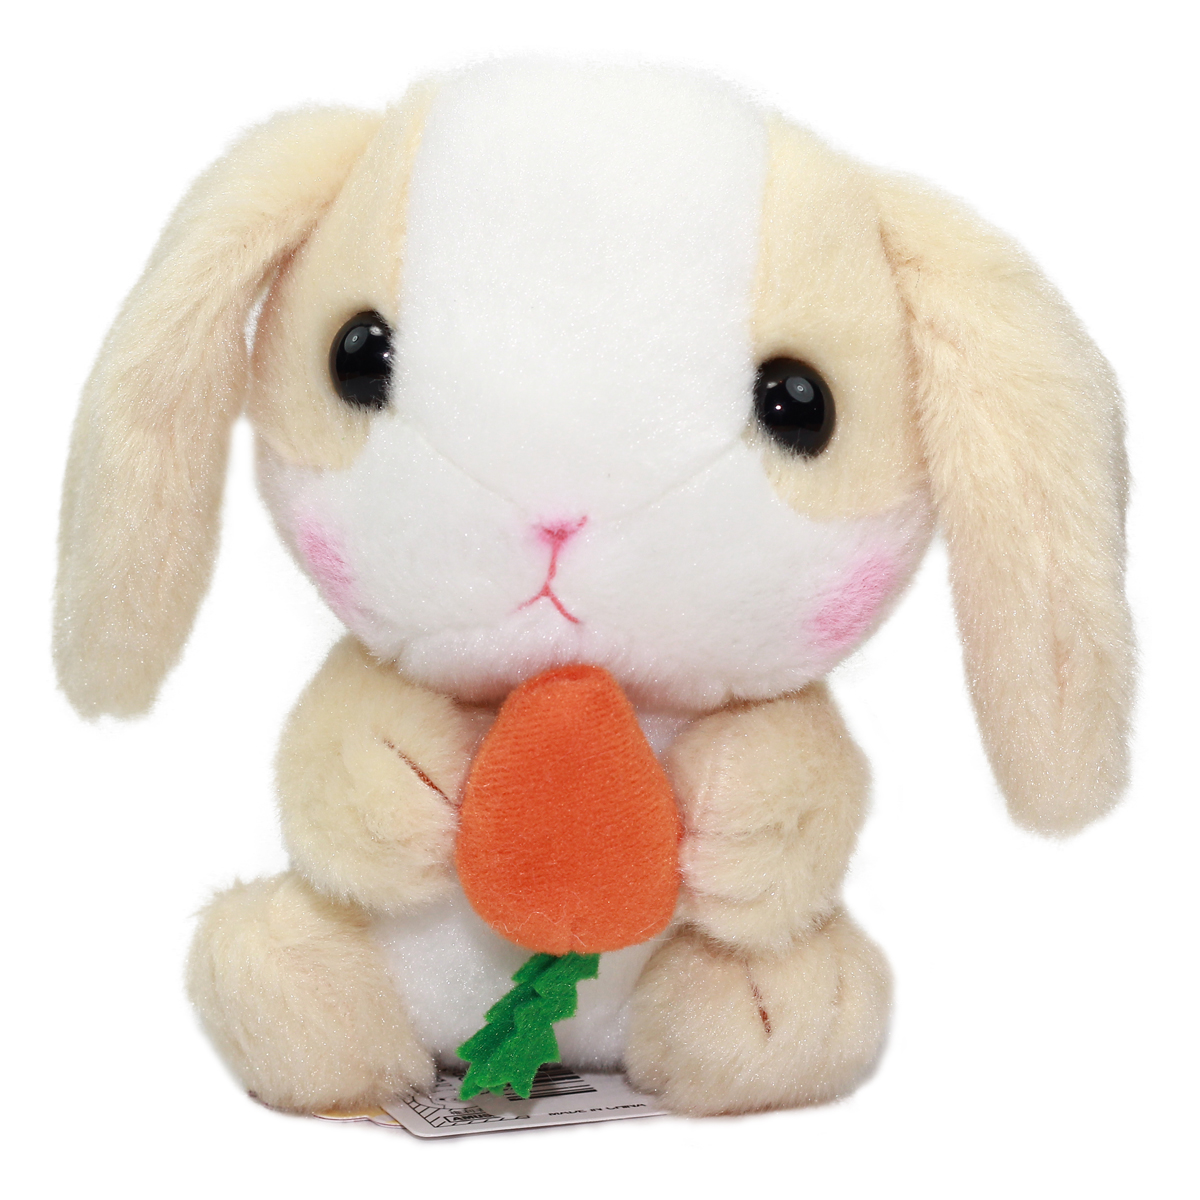 Amuse Bunny Plush Doll Sweet Garden Collection Cute Stuffed Animal Toy Beige/White 6 Inches